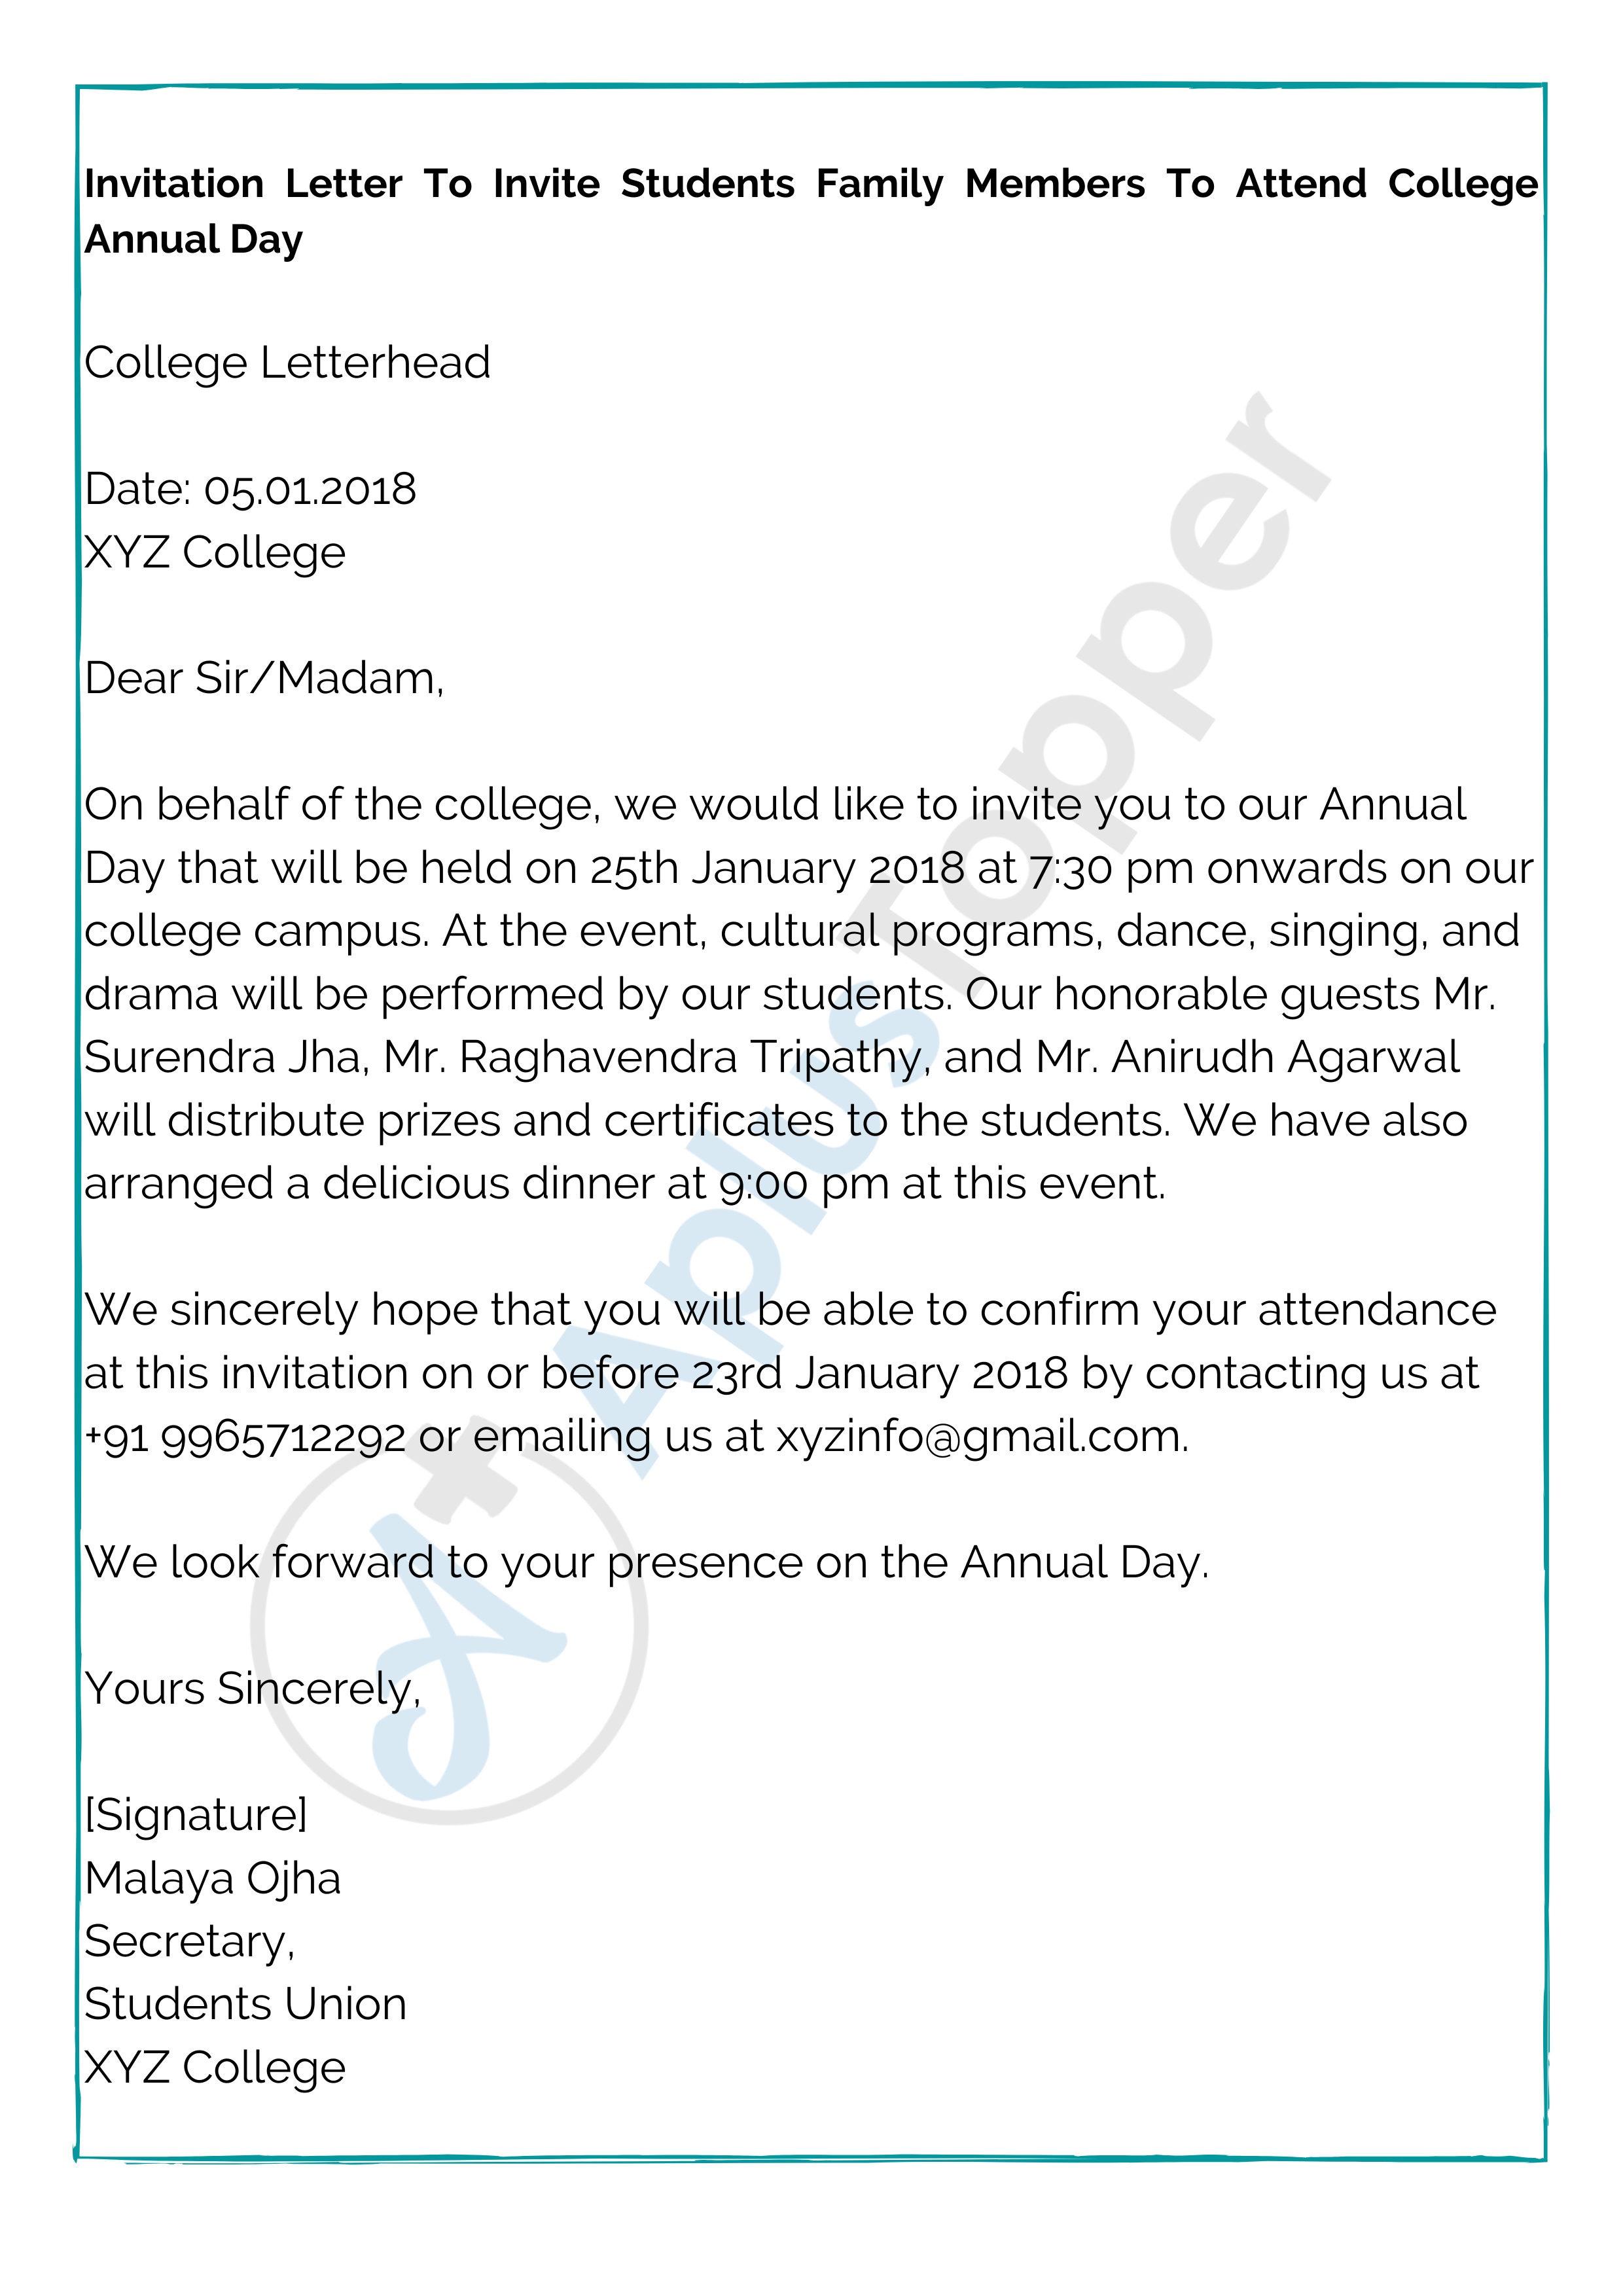 Invitation Letter To Invite Students Family Members To Attend College Annual Day